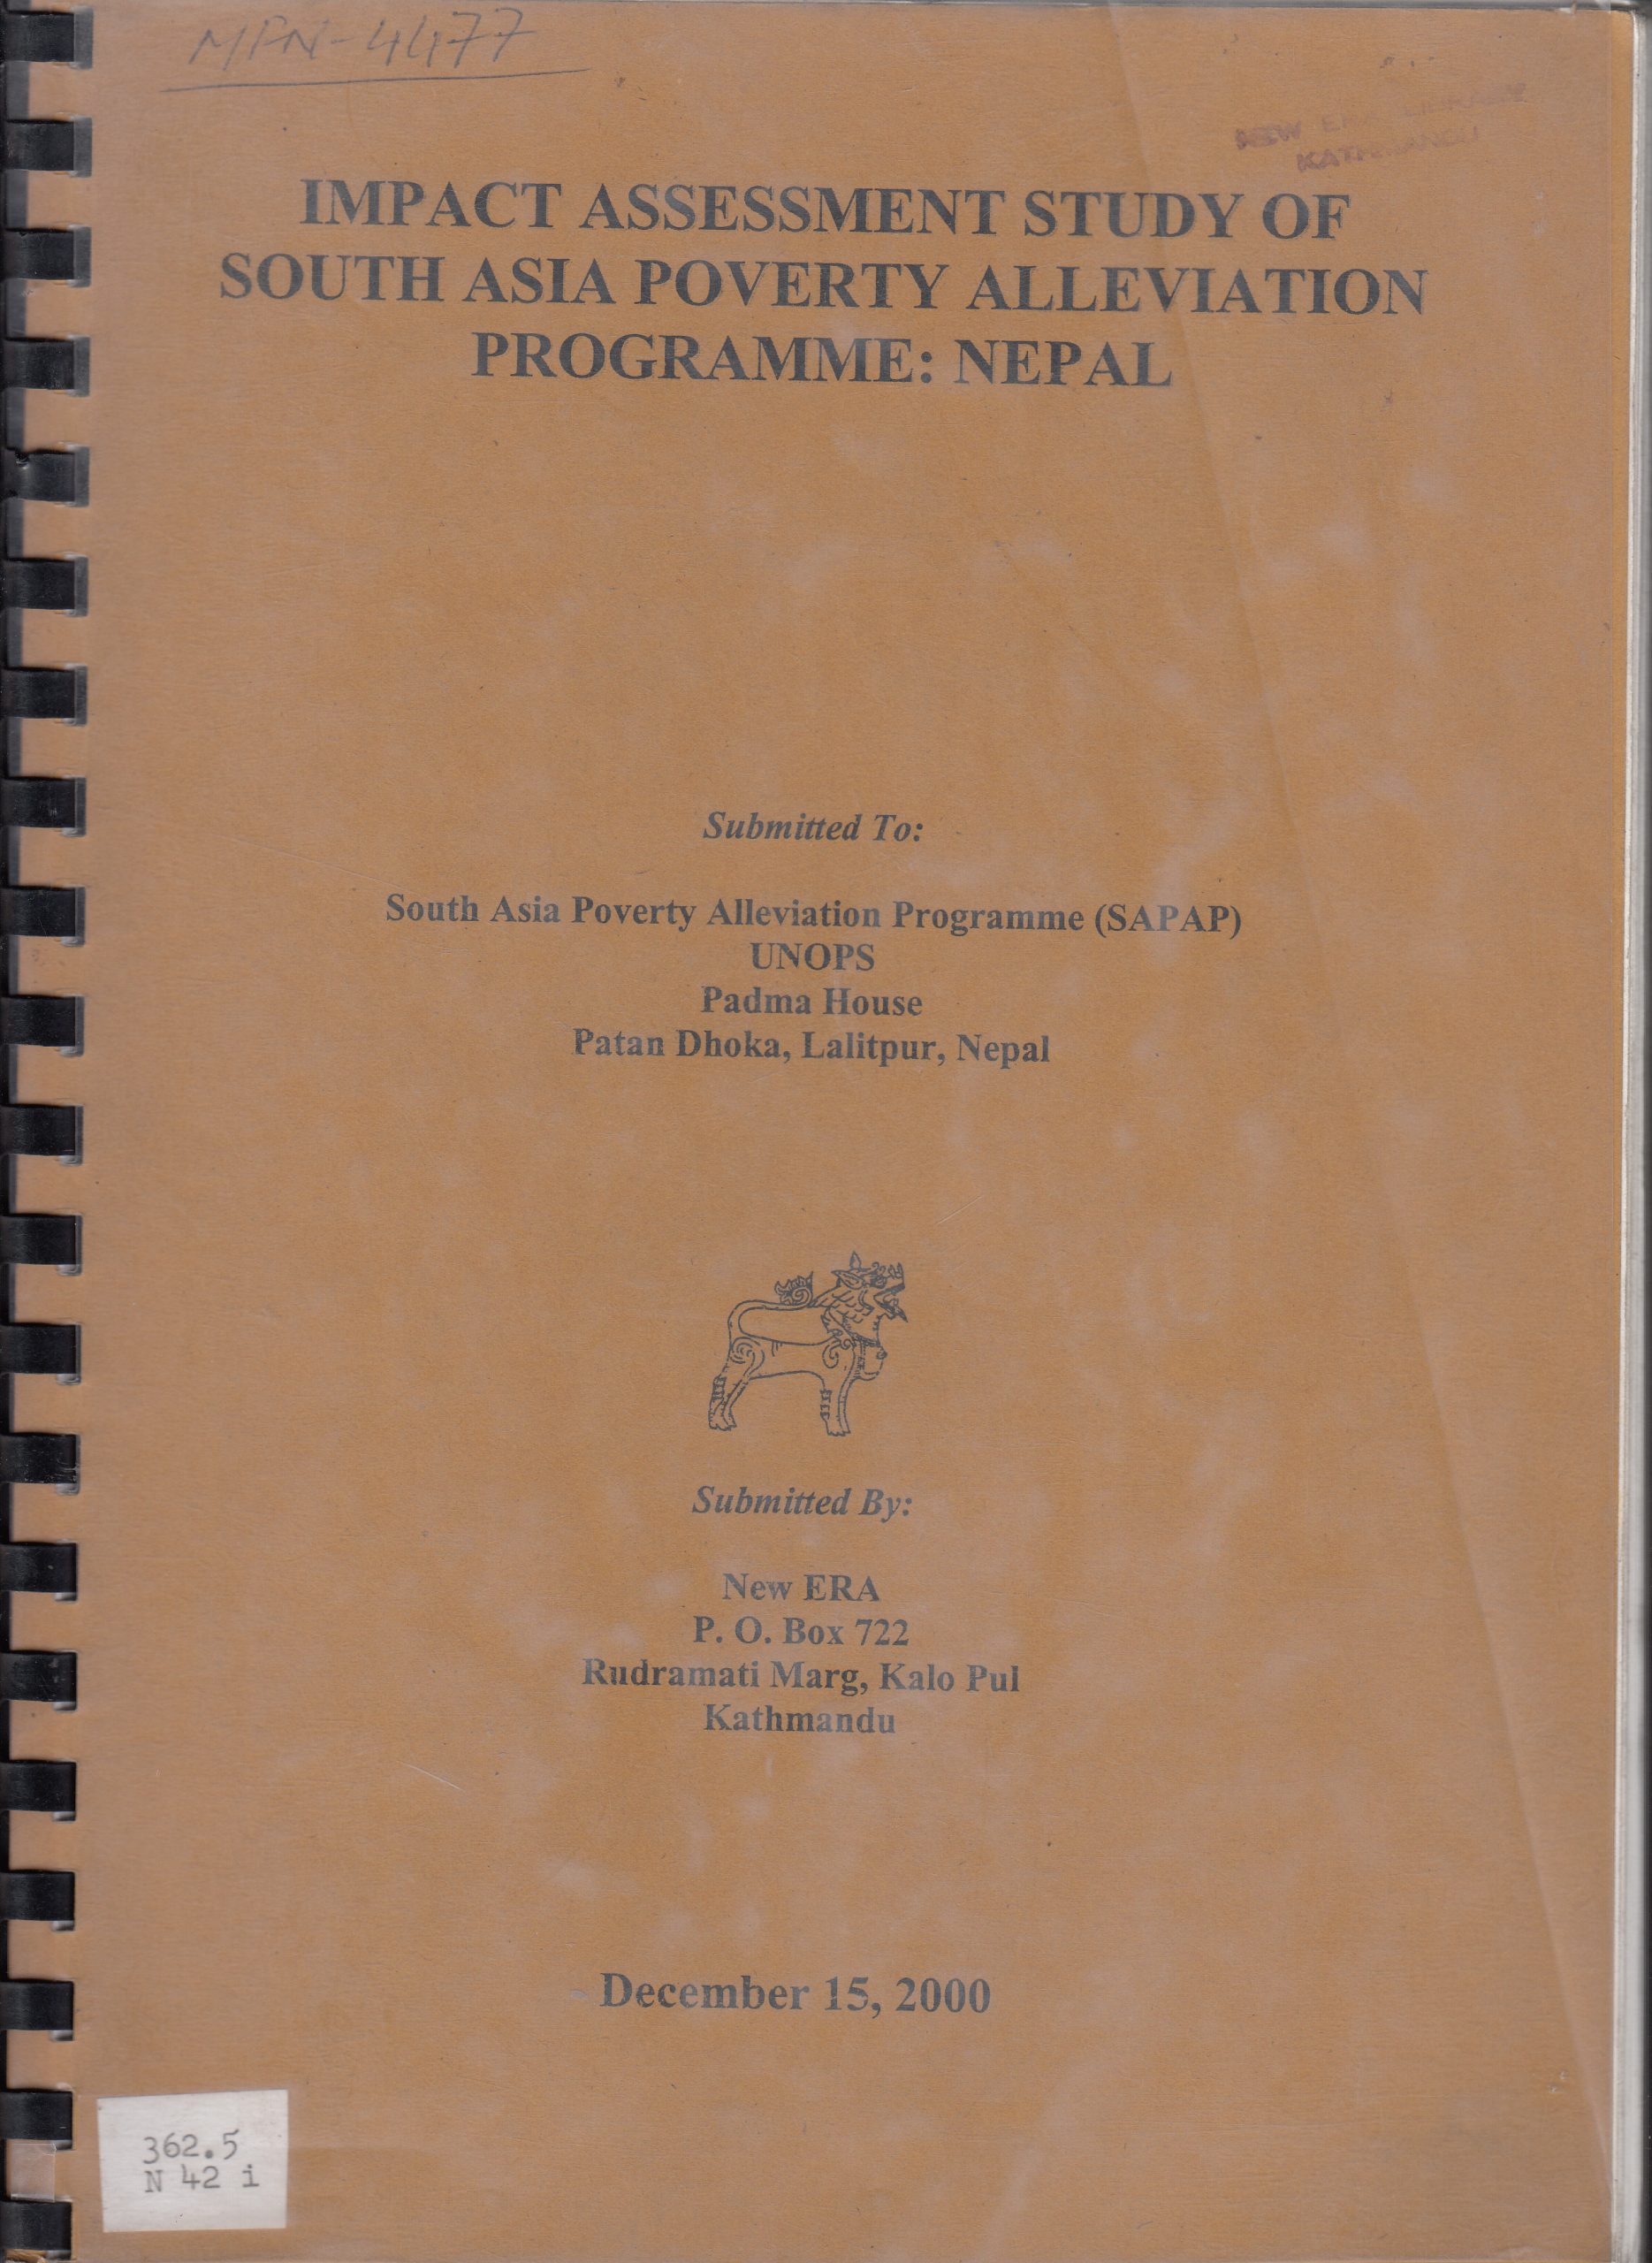 Impact Assessment Study of South Asia Poverty Alleviation Program: Nepal